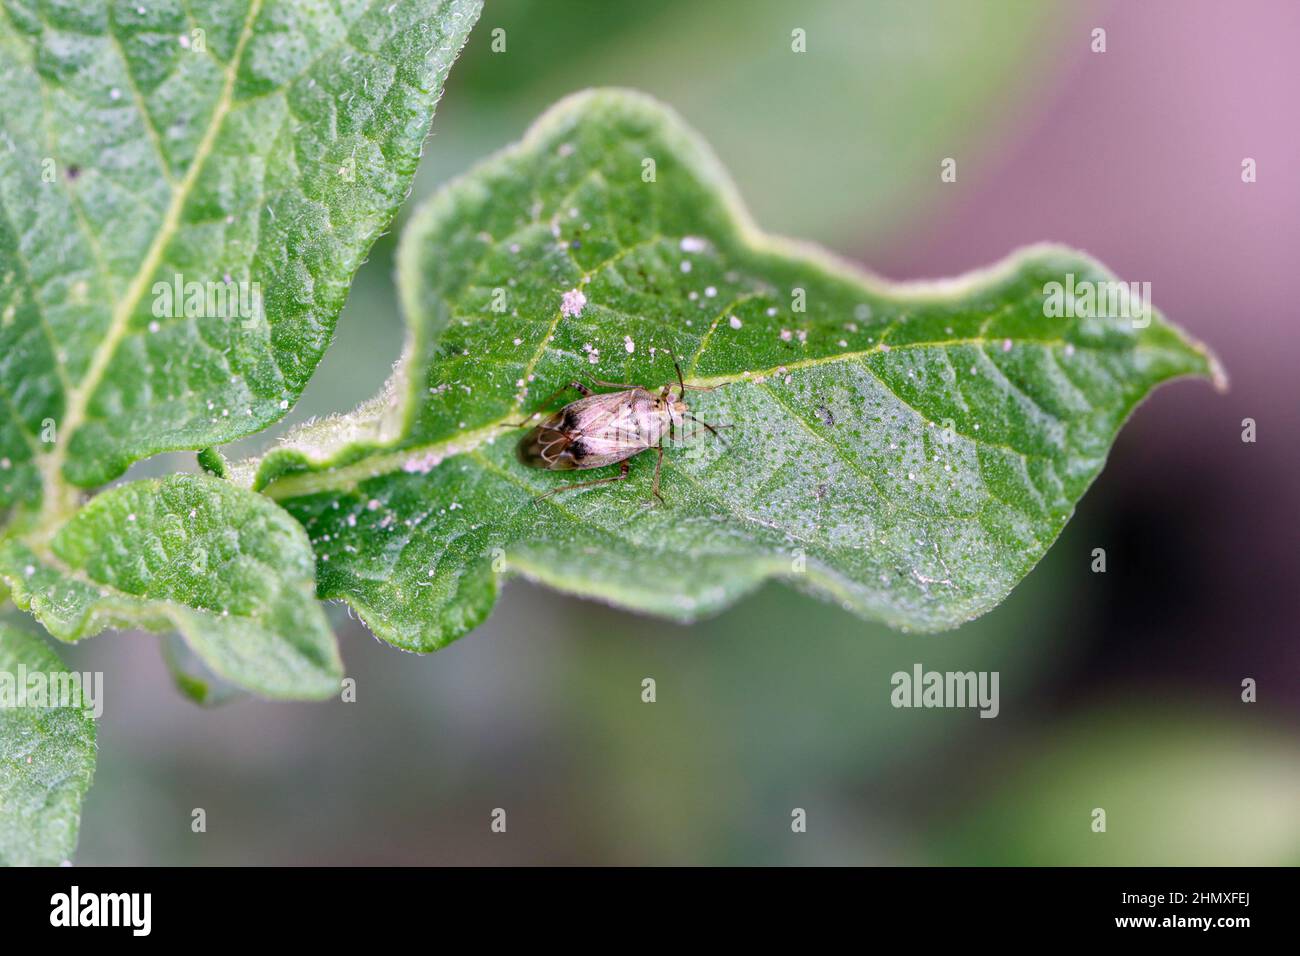 Capsid bug Miridae. An insect on potato green leaf. Stock Photo